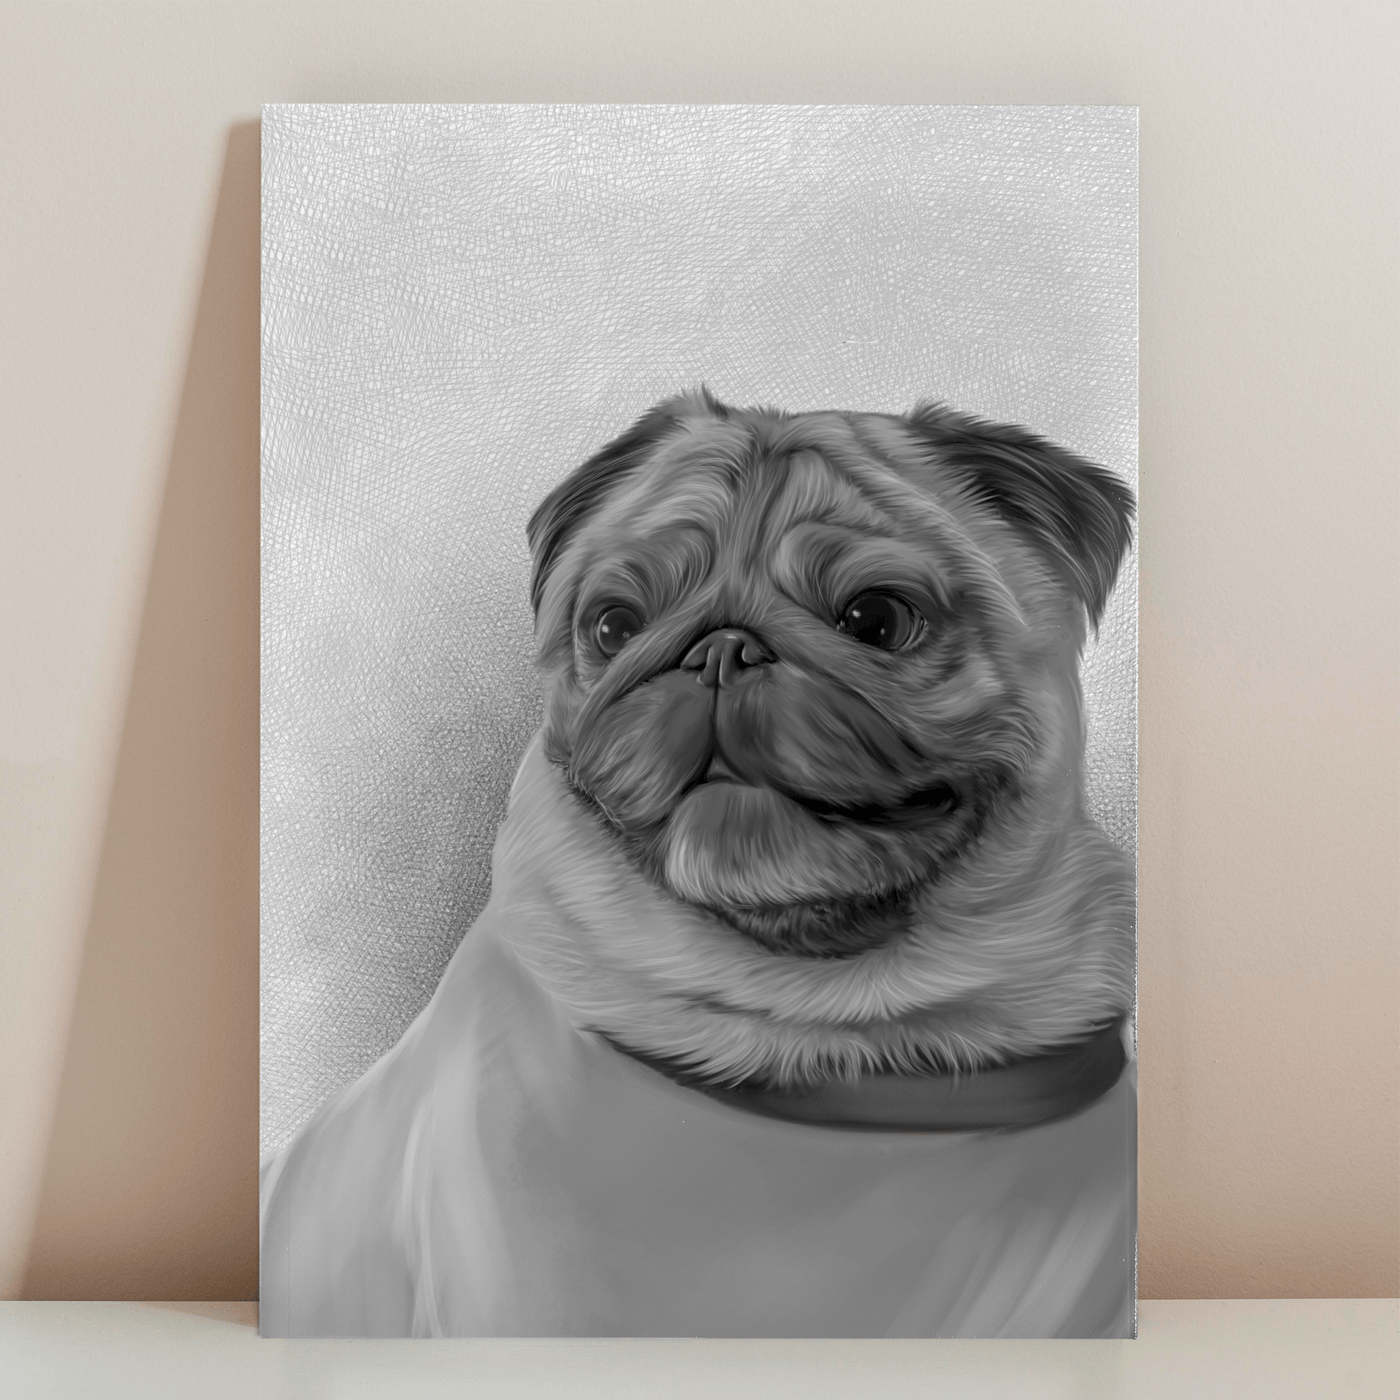 dog pencil portrait of an adorable dog drawn in black and white